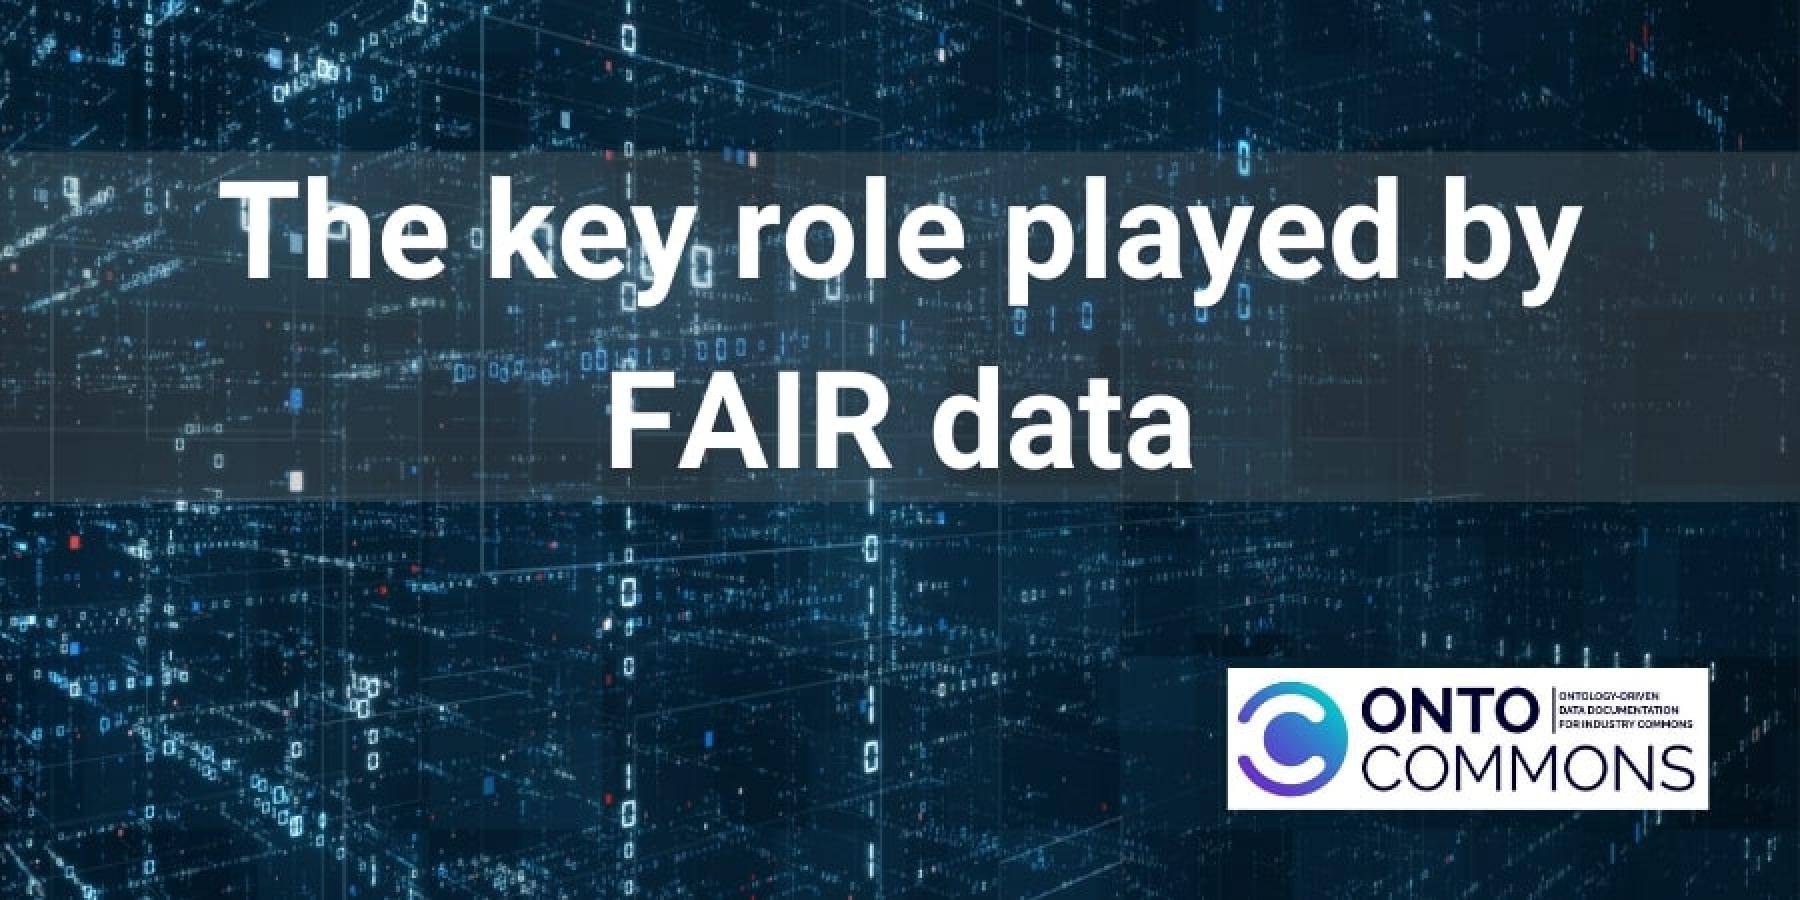 The key role played by FAIR data